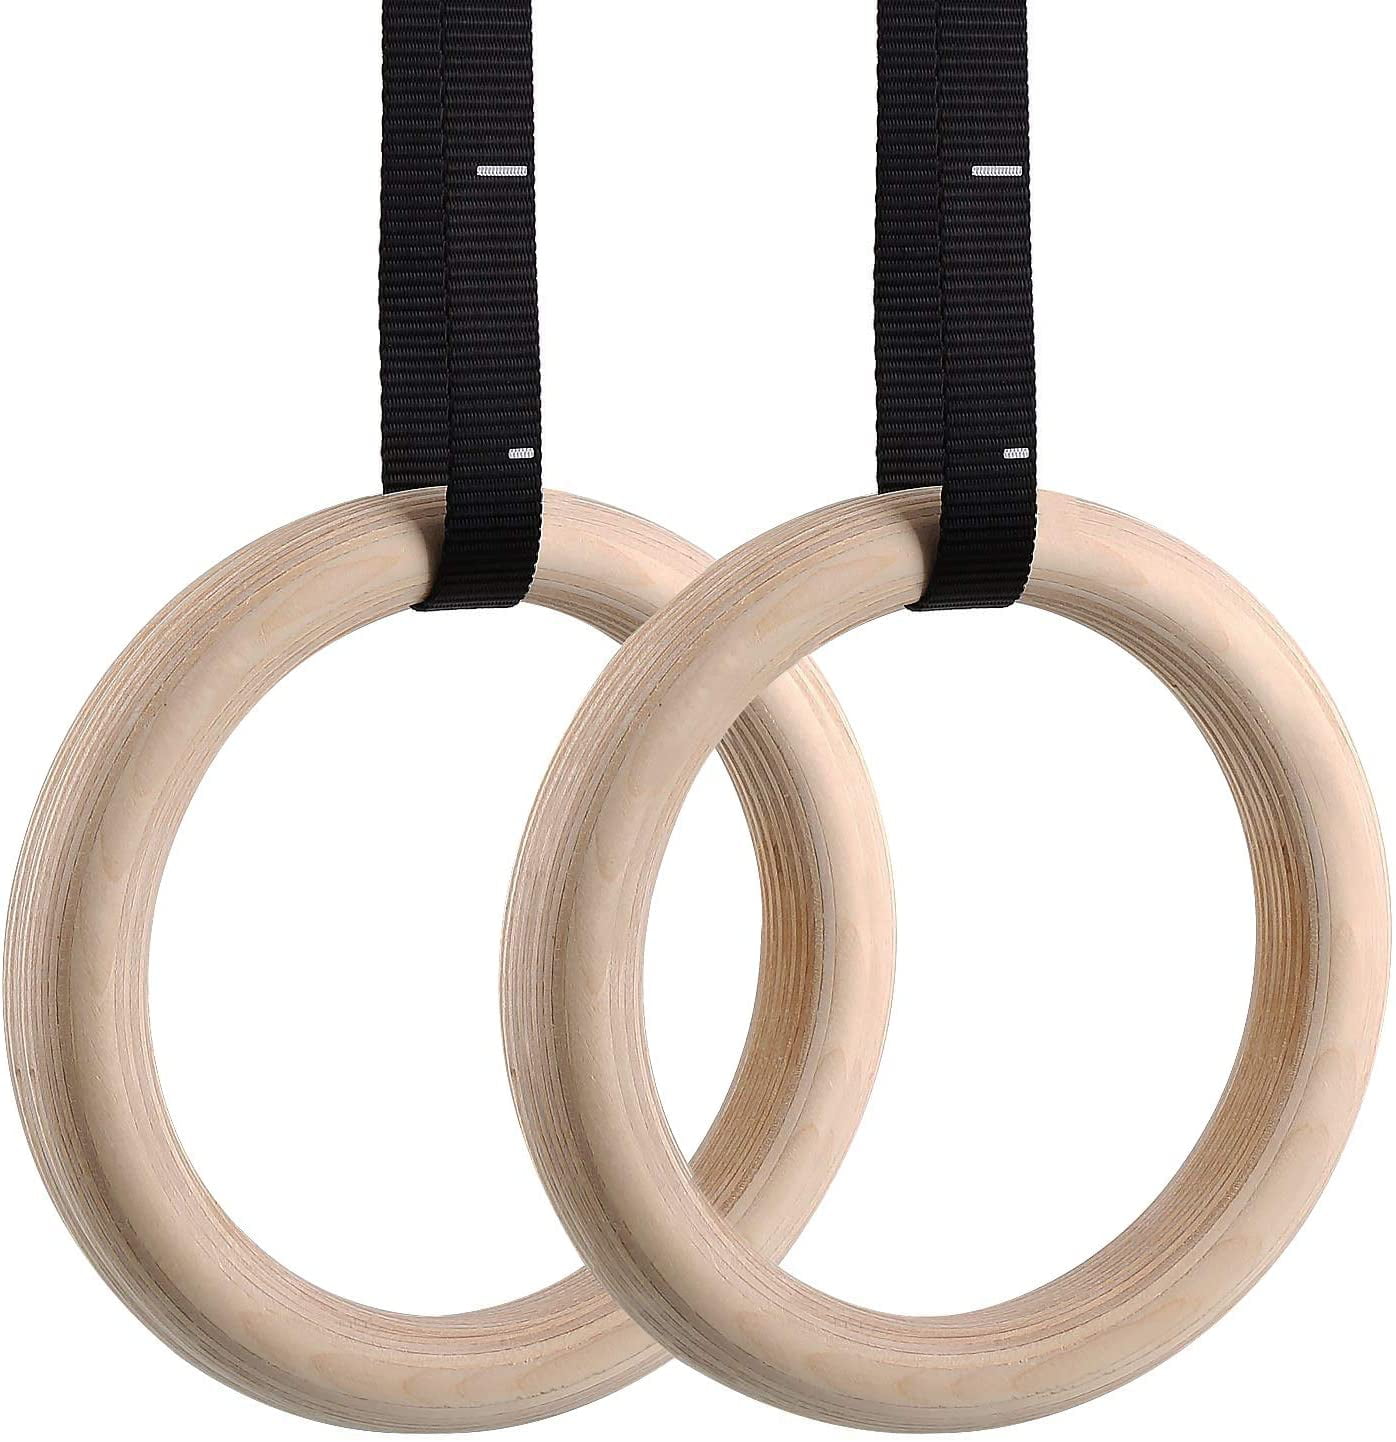 JunYito Gym Rings Wooden with Strap Gymnastic Rings Home Exercise Rings Fitness Gymnastic Athletic Training Rings Equipment Pull Ups Dip Rings 